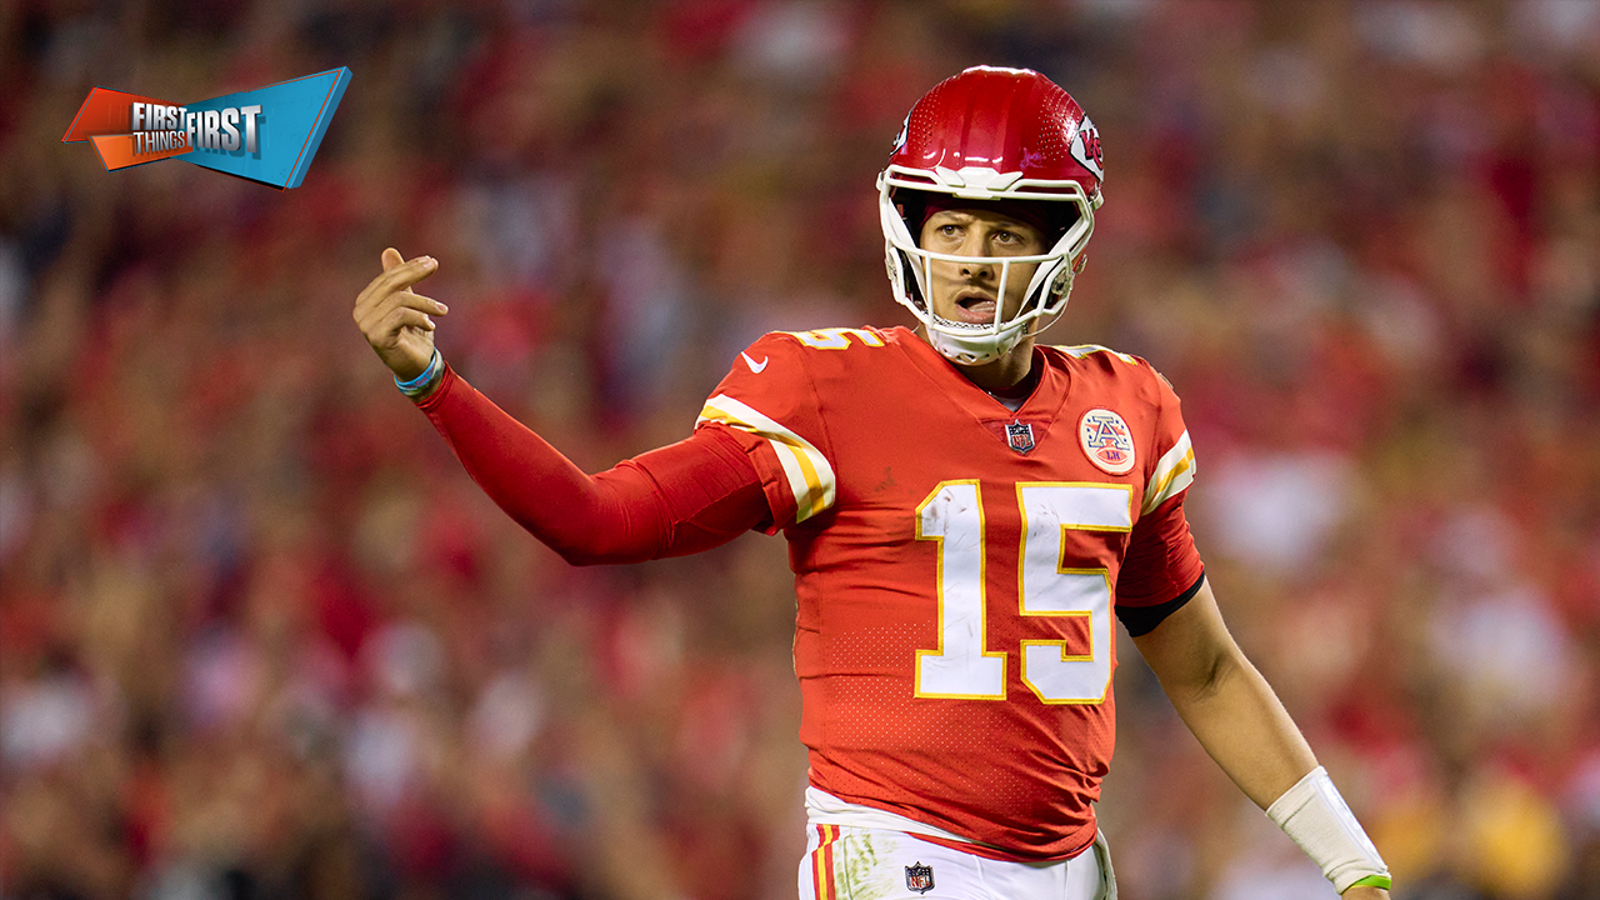 Nick Wright celebrates Patrick Mahomes, Chiefs Week 5 comeback MNF win |  THE IMPORTANT THINGS FIRST